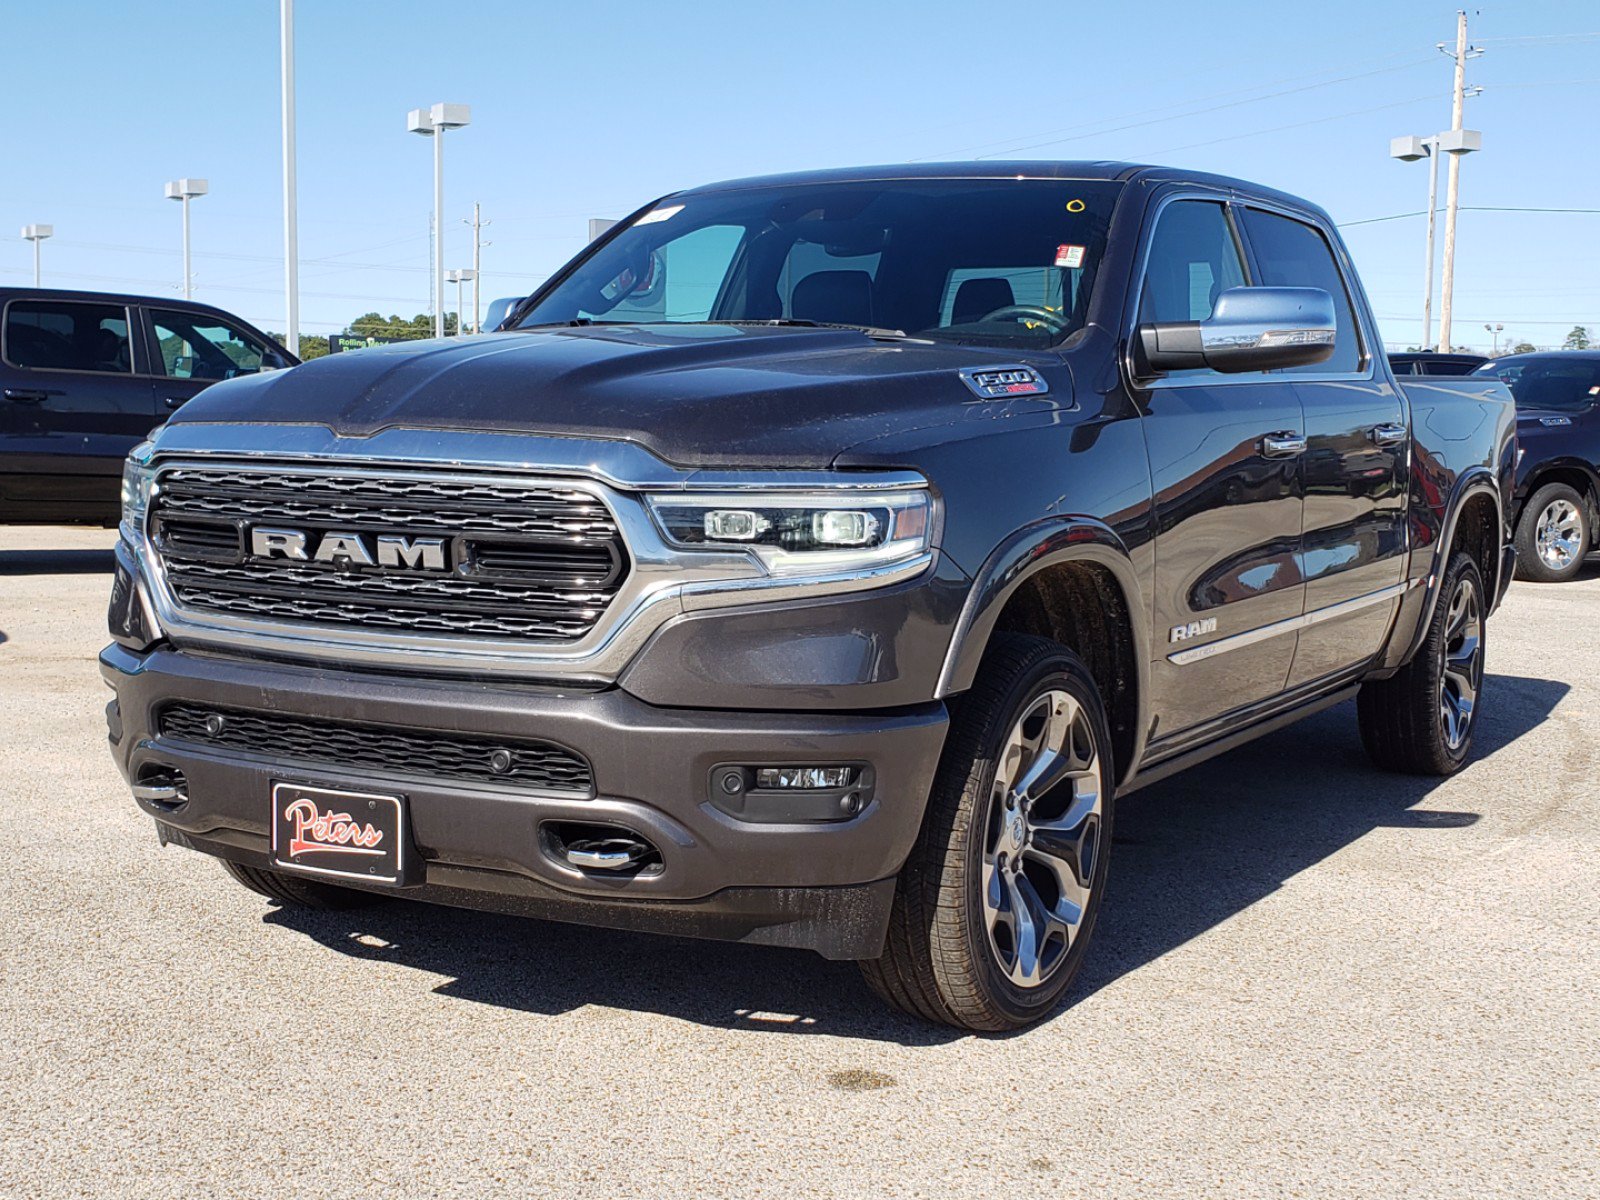 New 2020 Ram 1500 Limited Crew Cab in Longview #20D442 | Peters